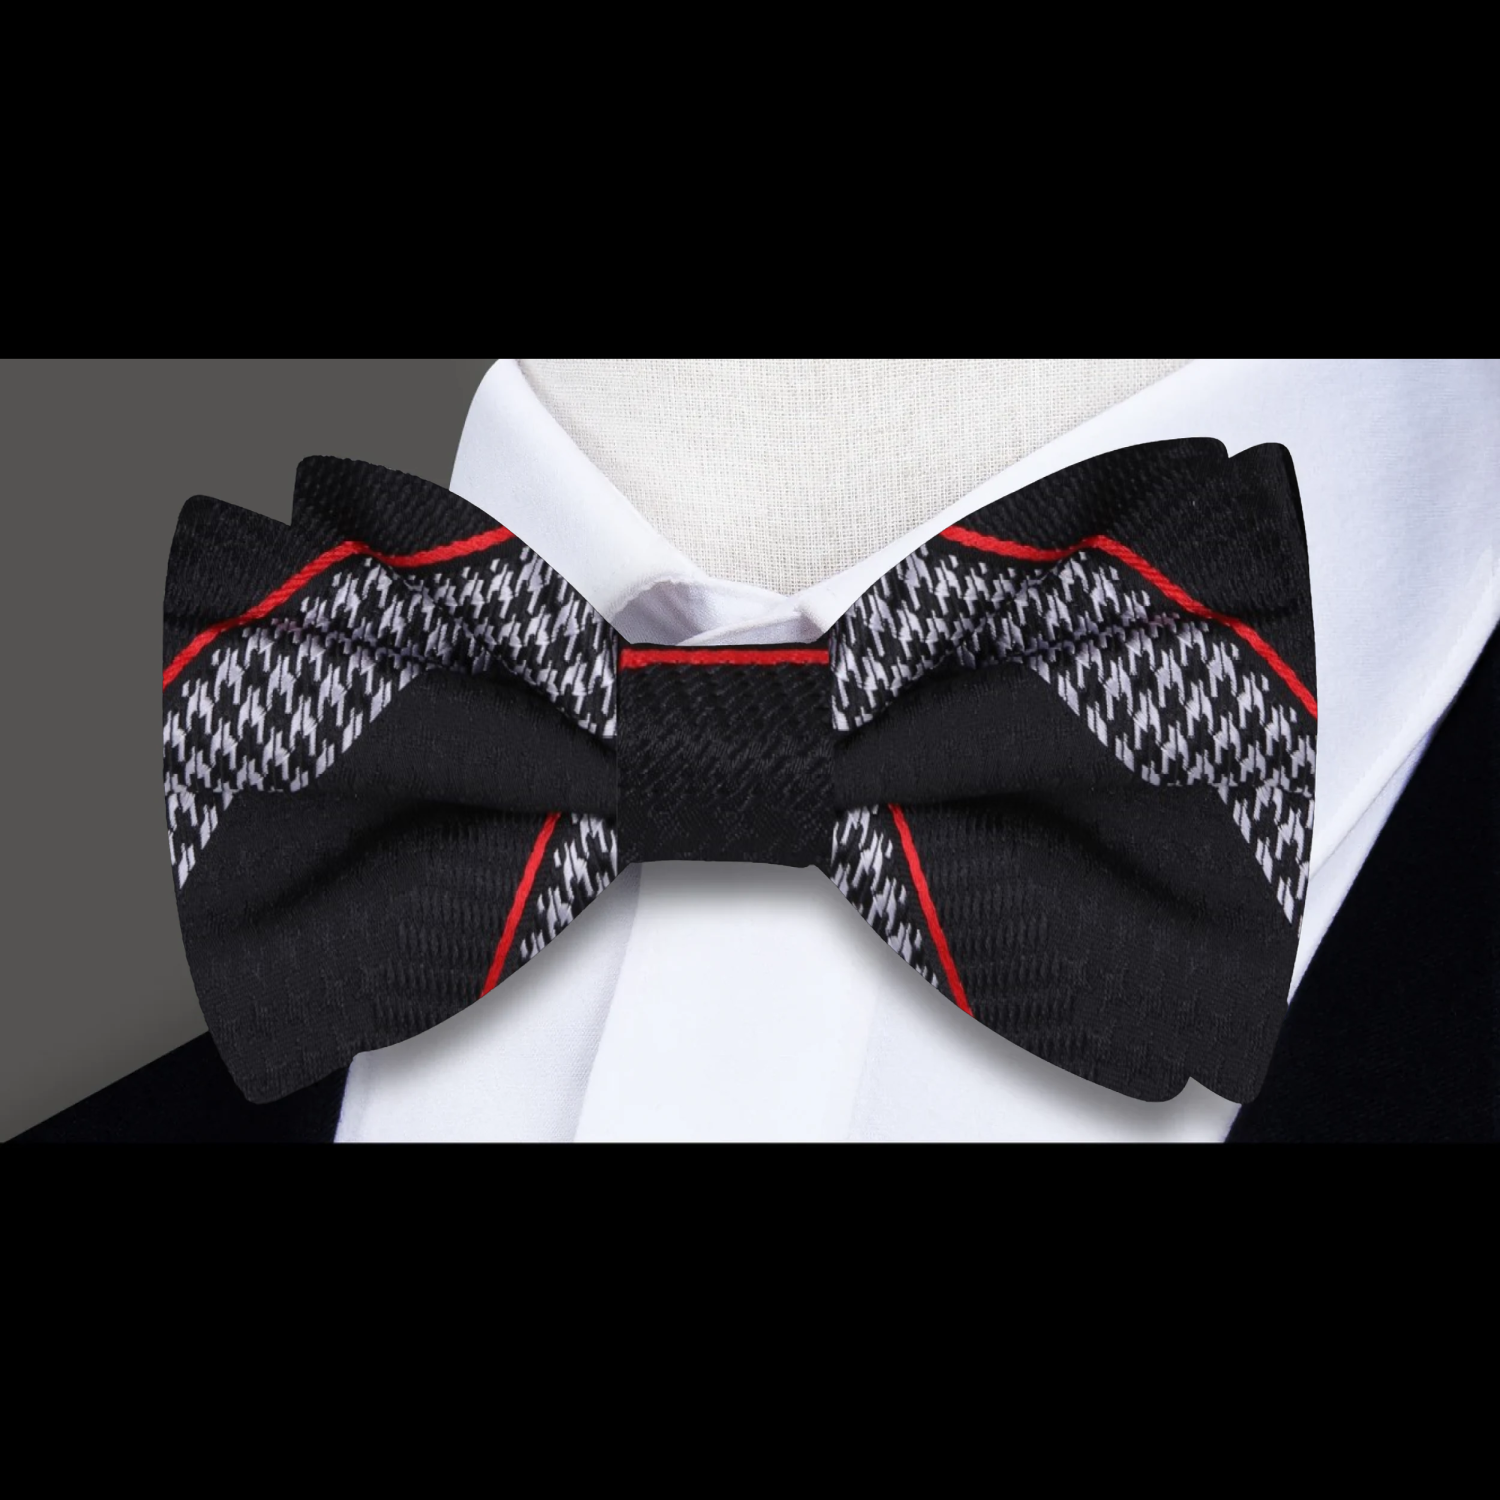 A Black, Red, Grey Houndstooth and Stripe Pattern Bow Tie